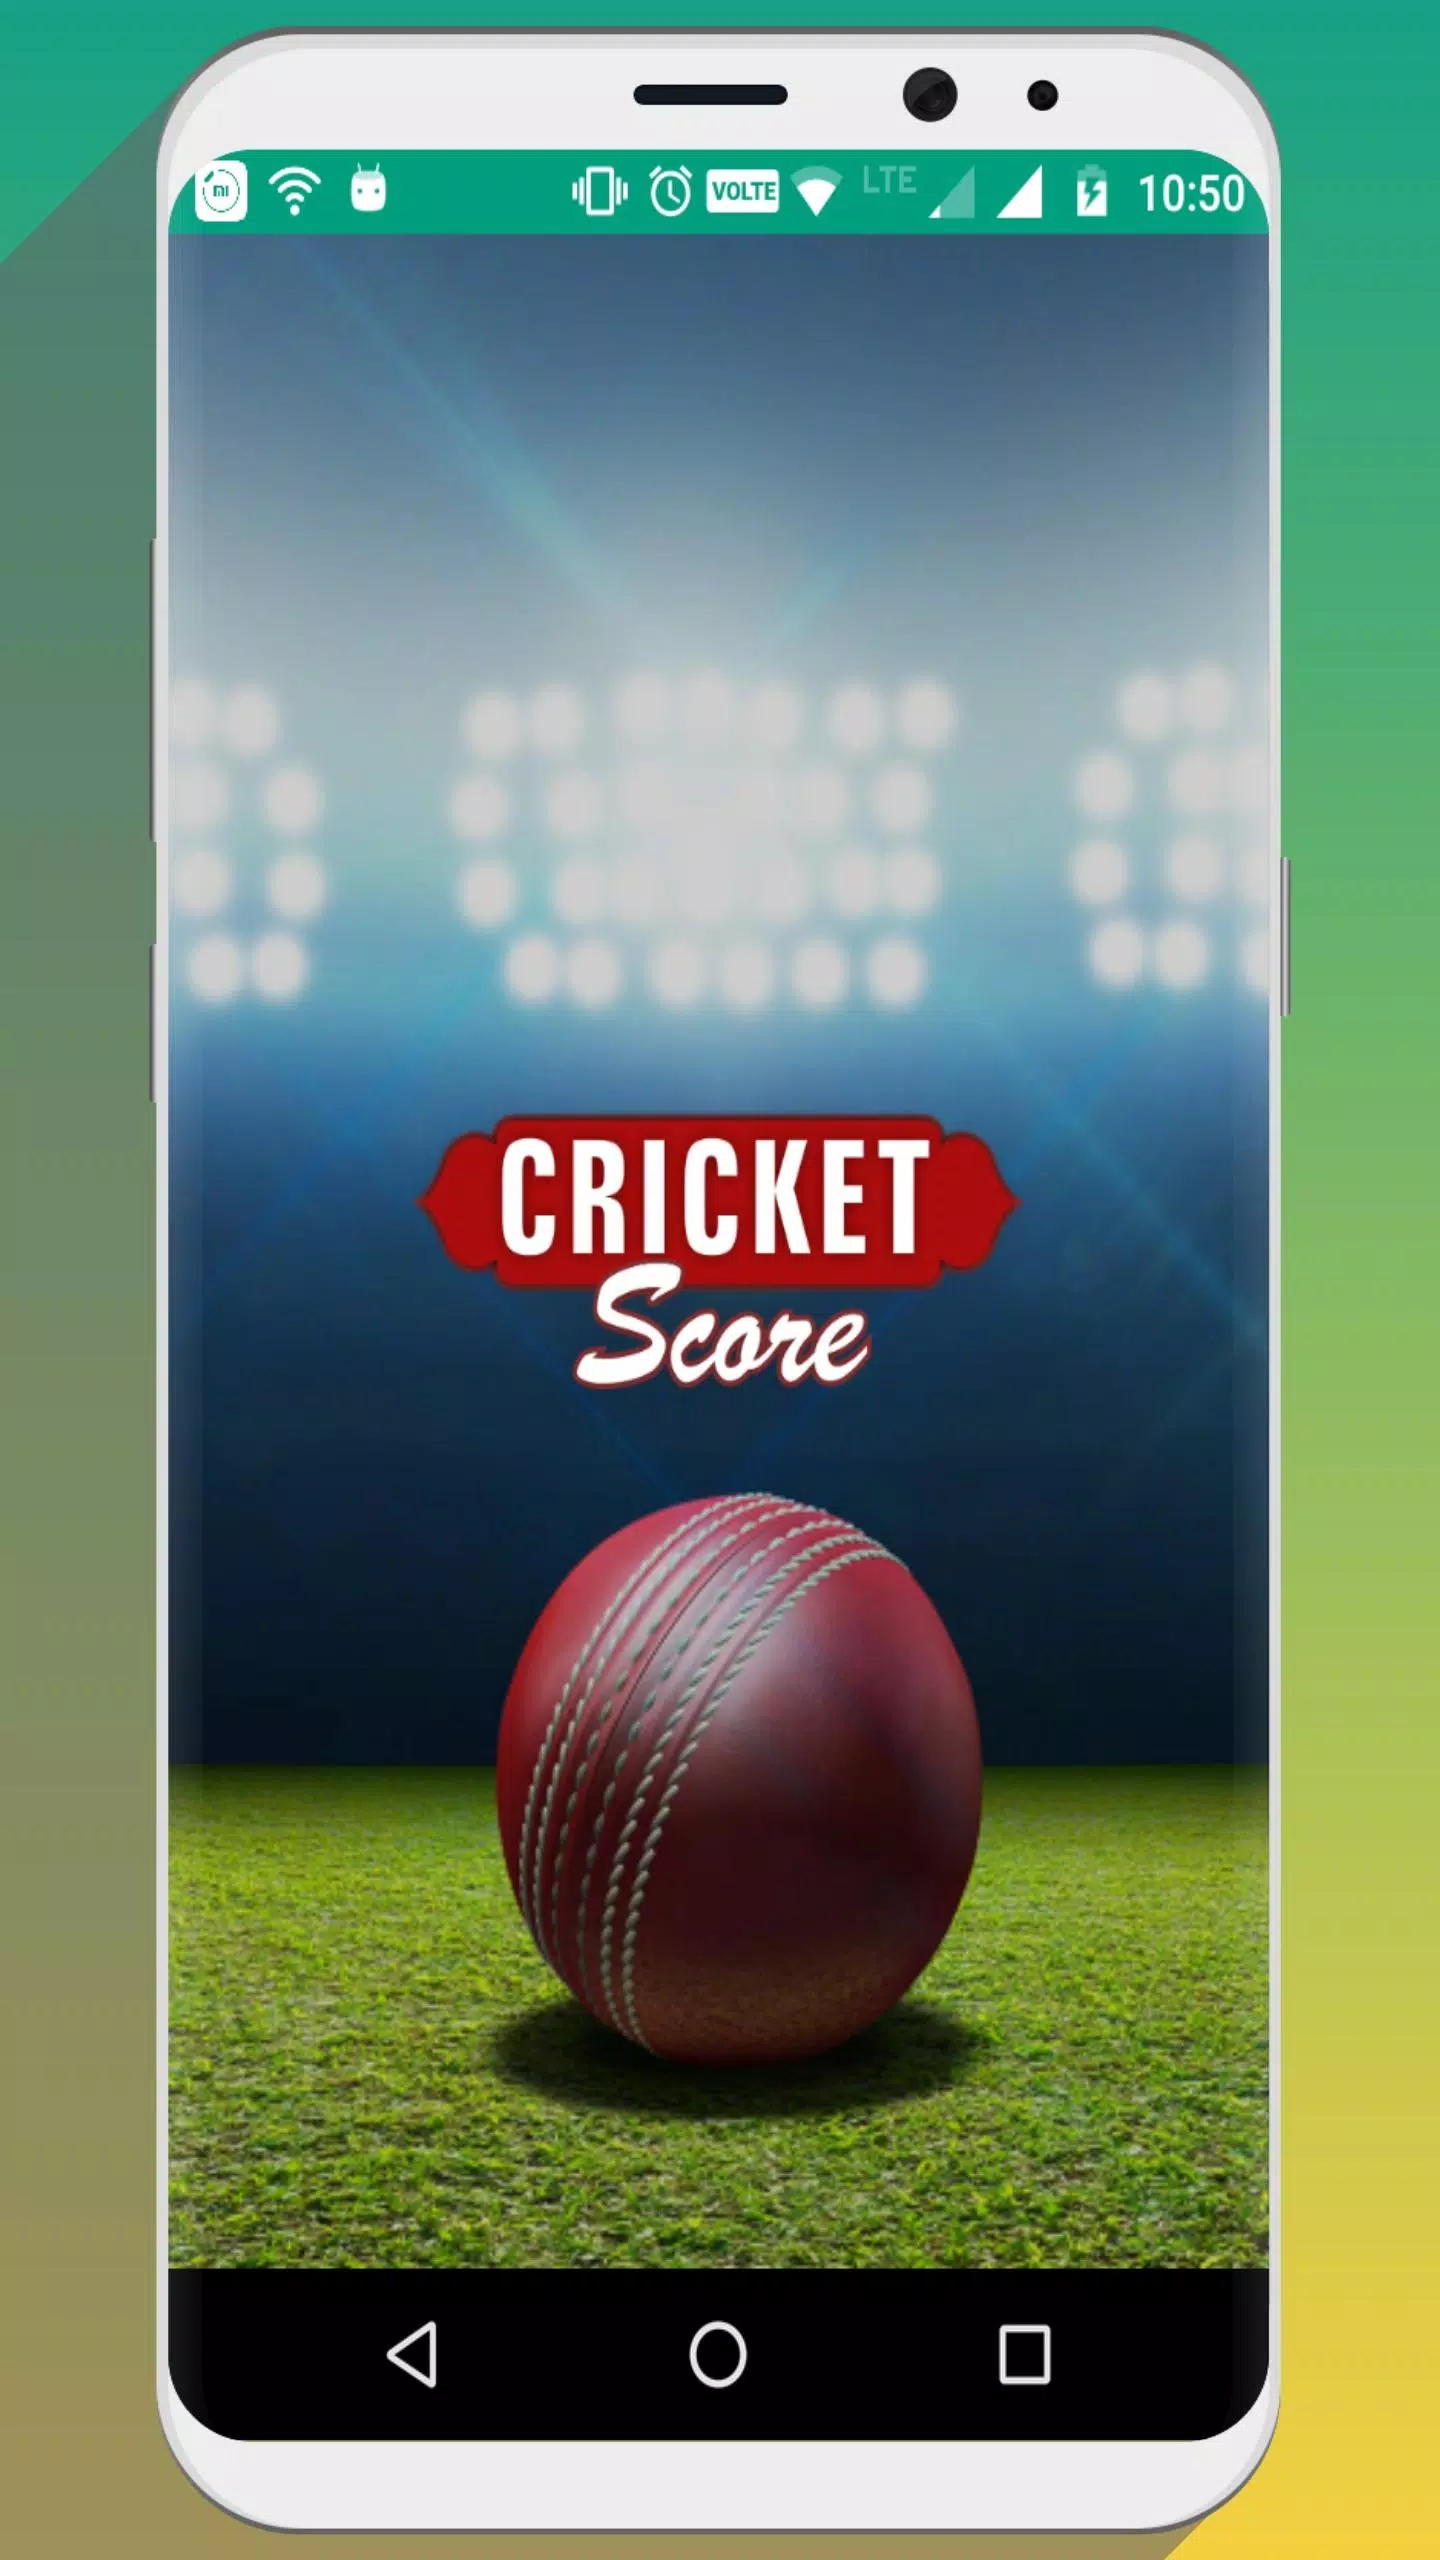 CricketScore: Live Cricket Match Score, News App APK for Android Download